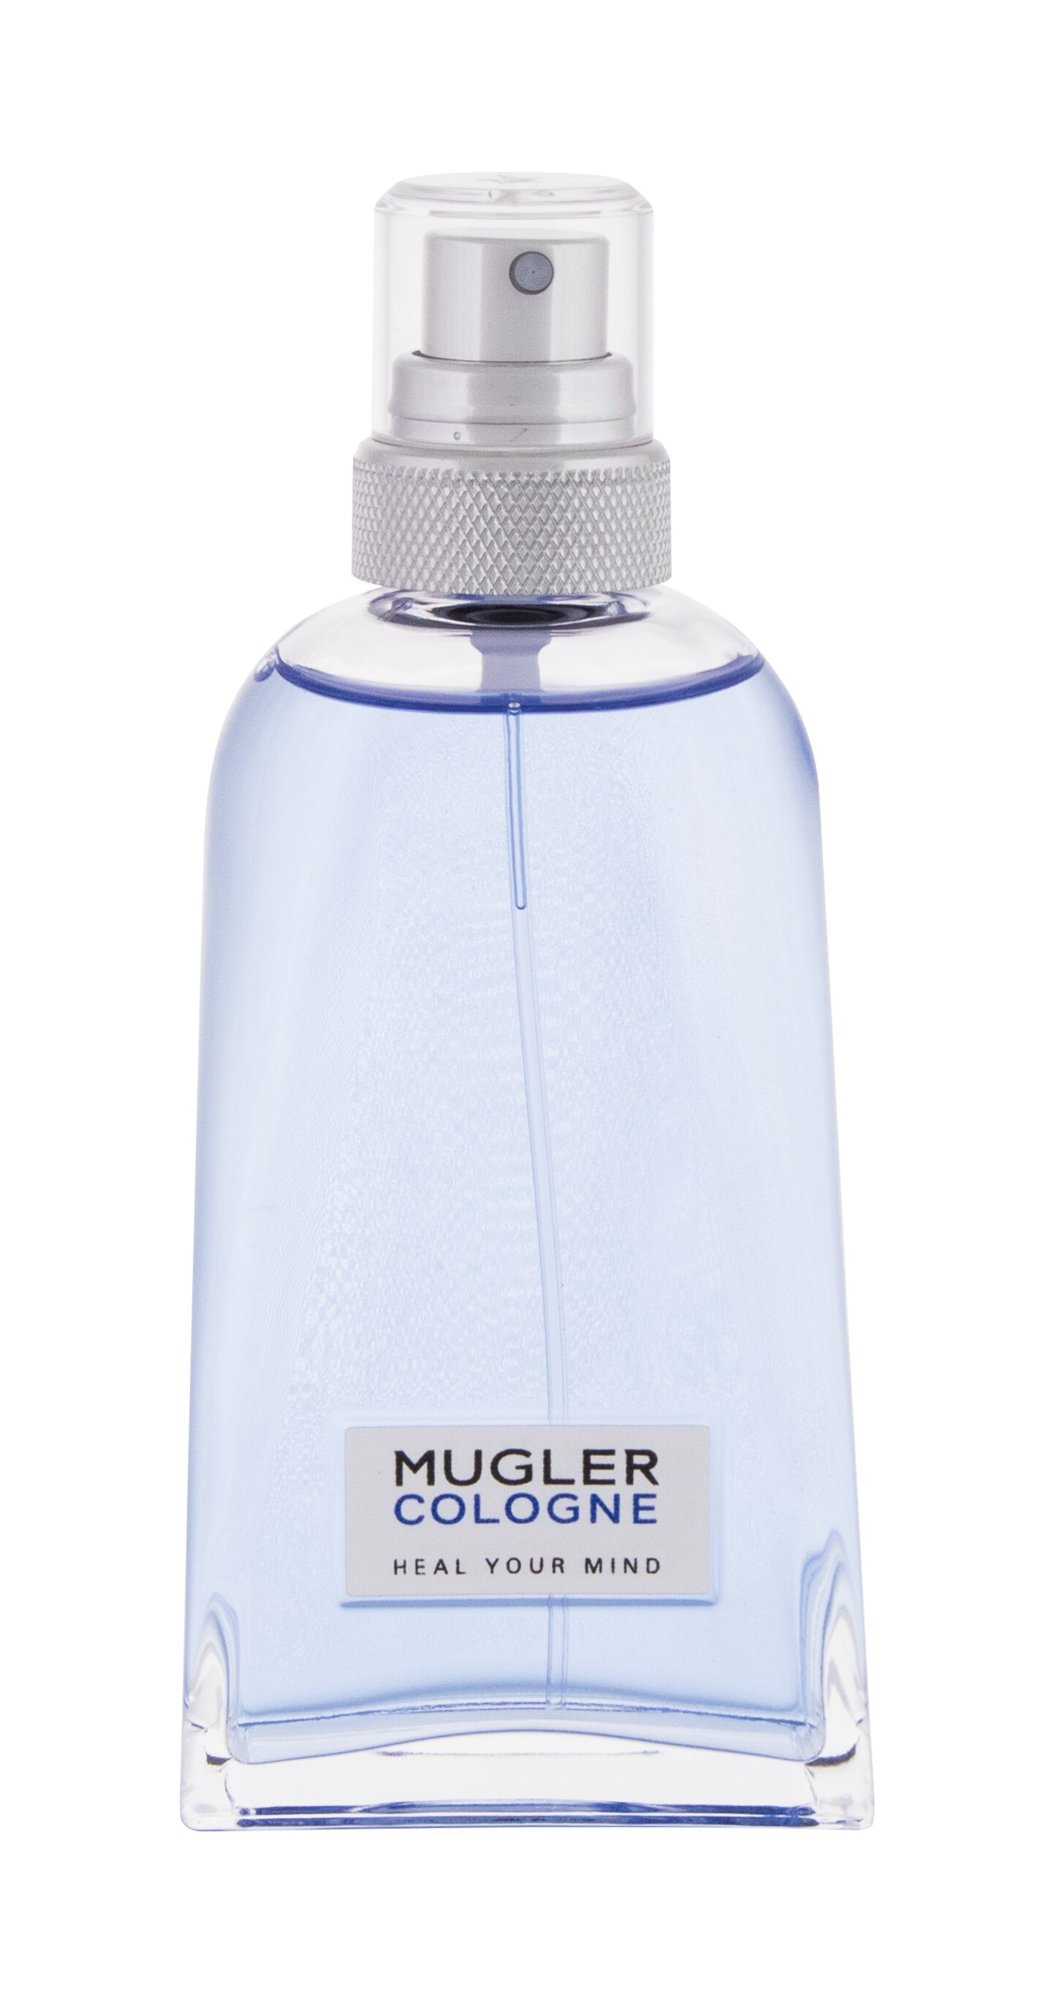 Thierry Mugler Cologne Heal Your Mind Kvepalai Unisex